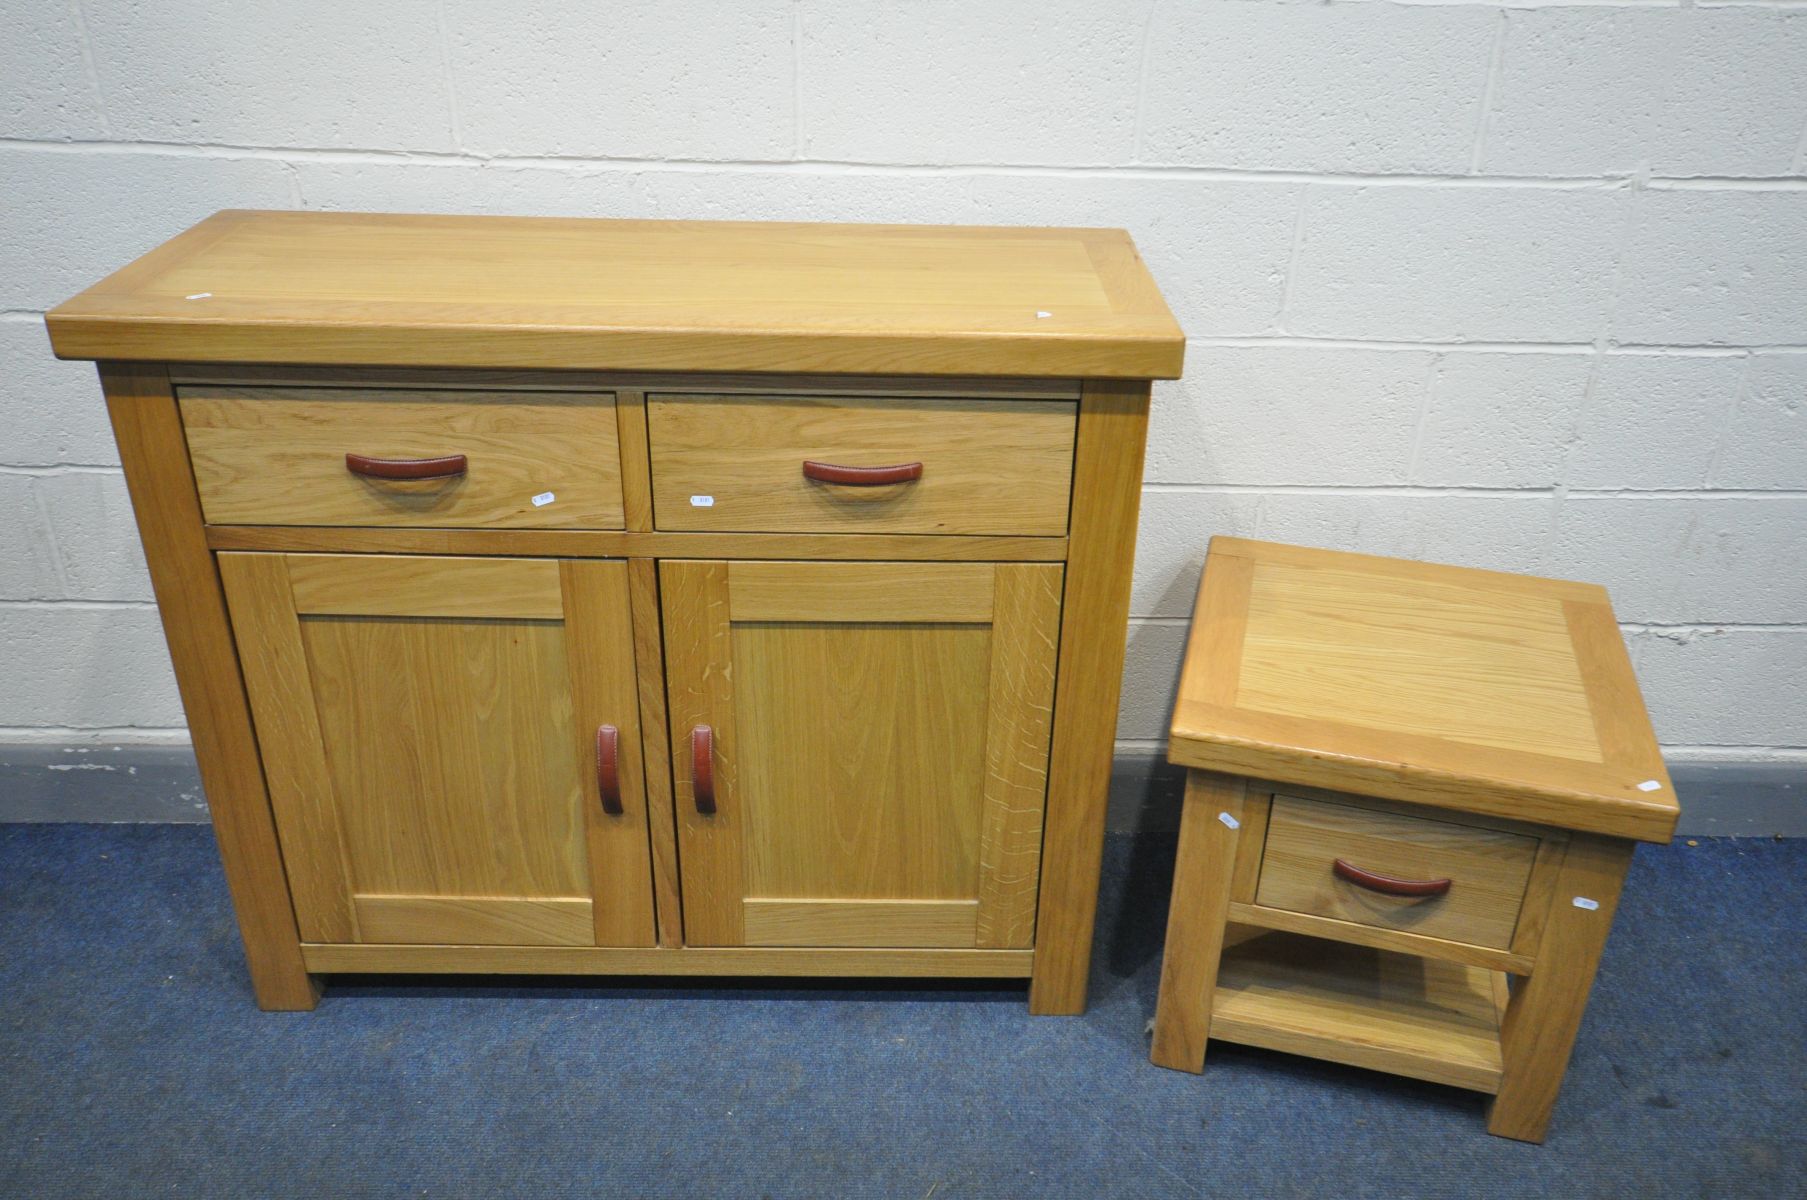 A 'GLOBAL HOME' LIGHT OAK SIDEBOARD with two drawers, width 120cm x depth 45cm x height 100cm, and a